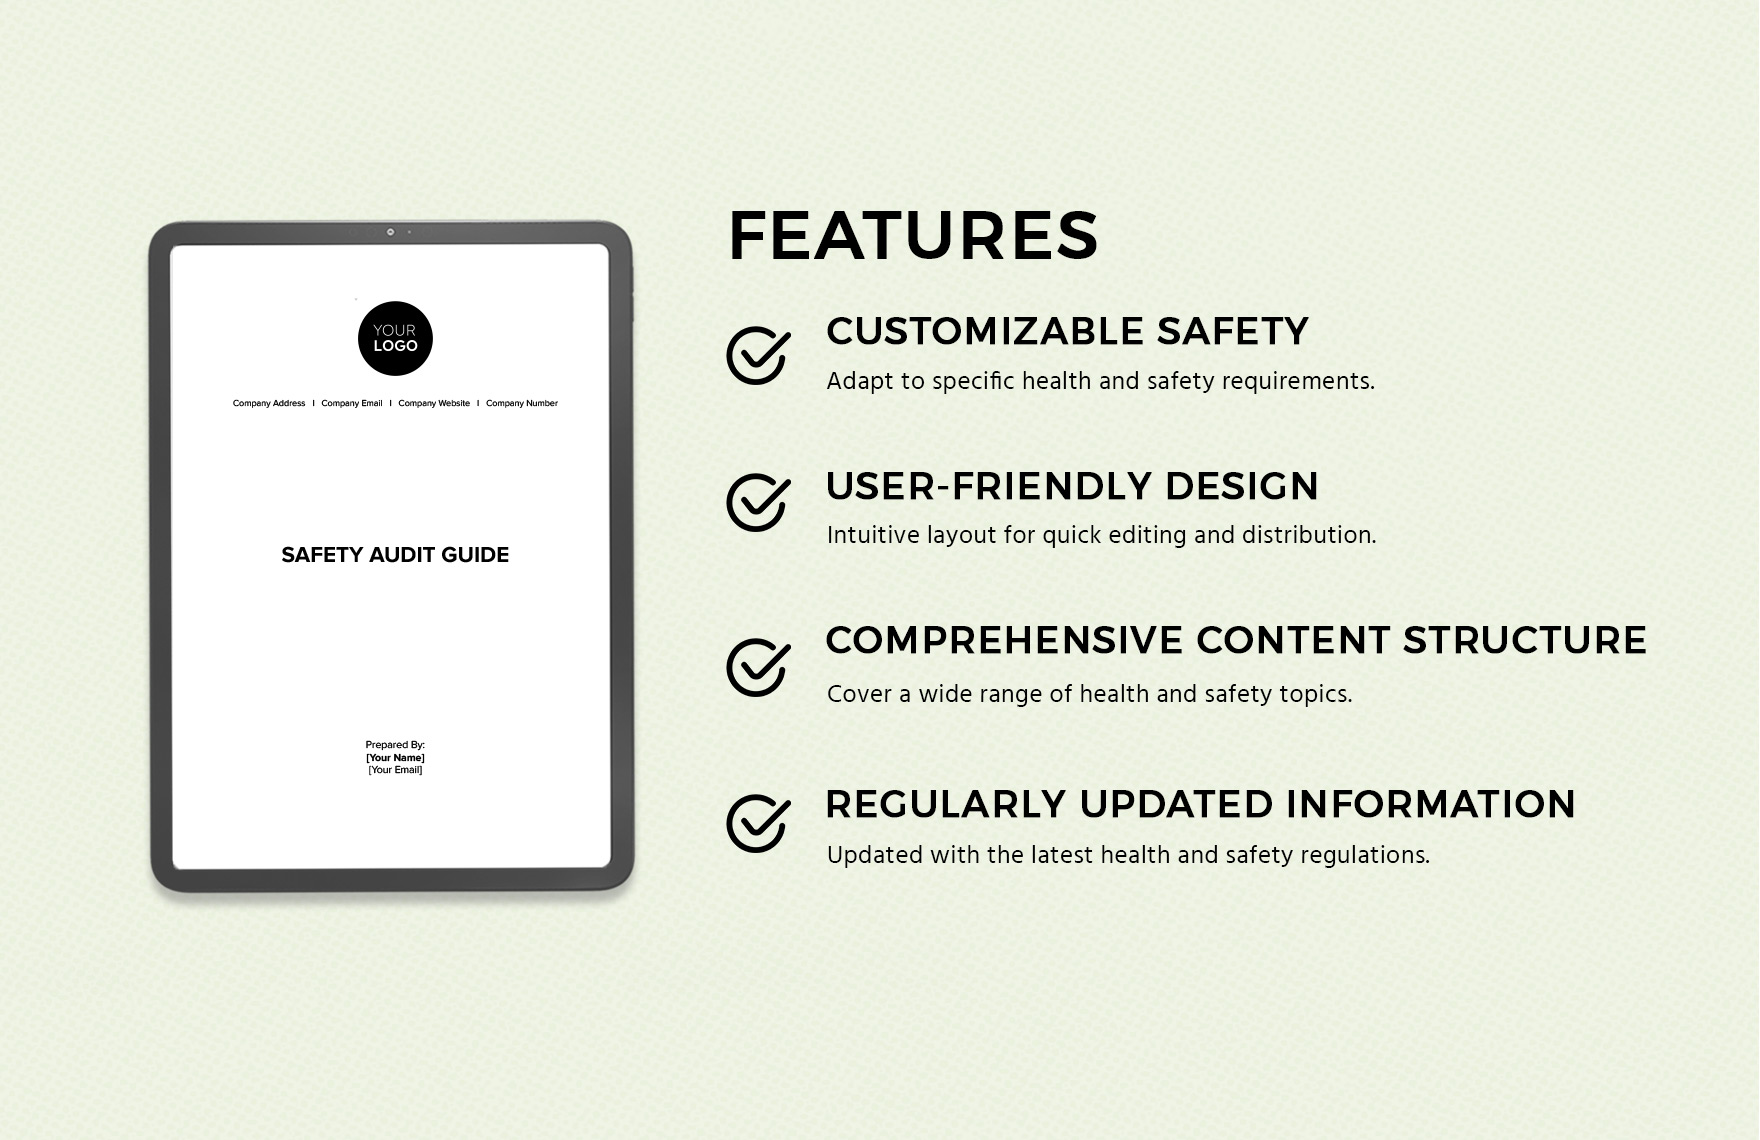 Safety Audit Guide Template